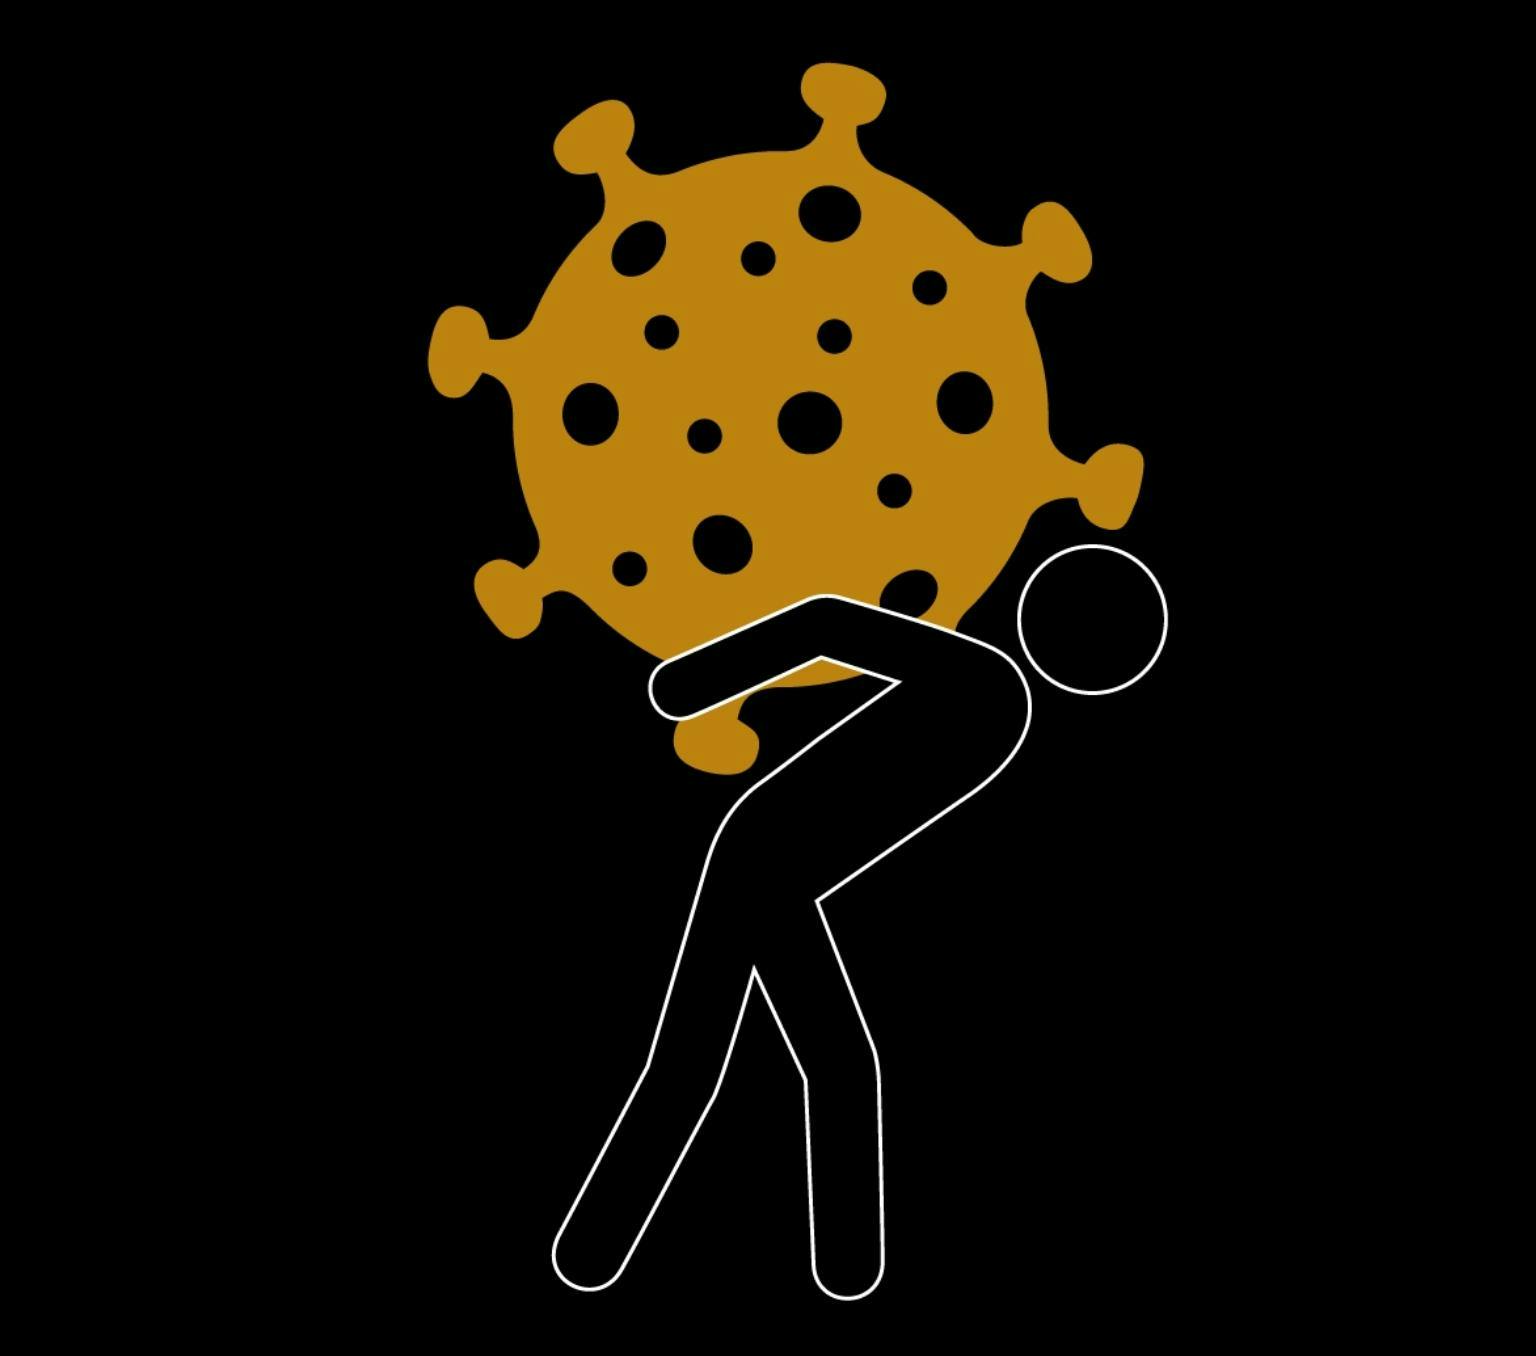 graphic of with the outline of a person holding a large virus shaped structure on their back which is weighing the person down